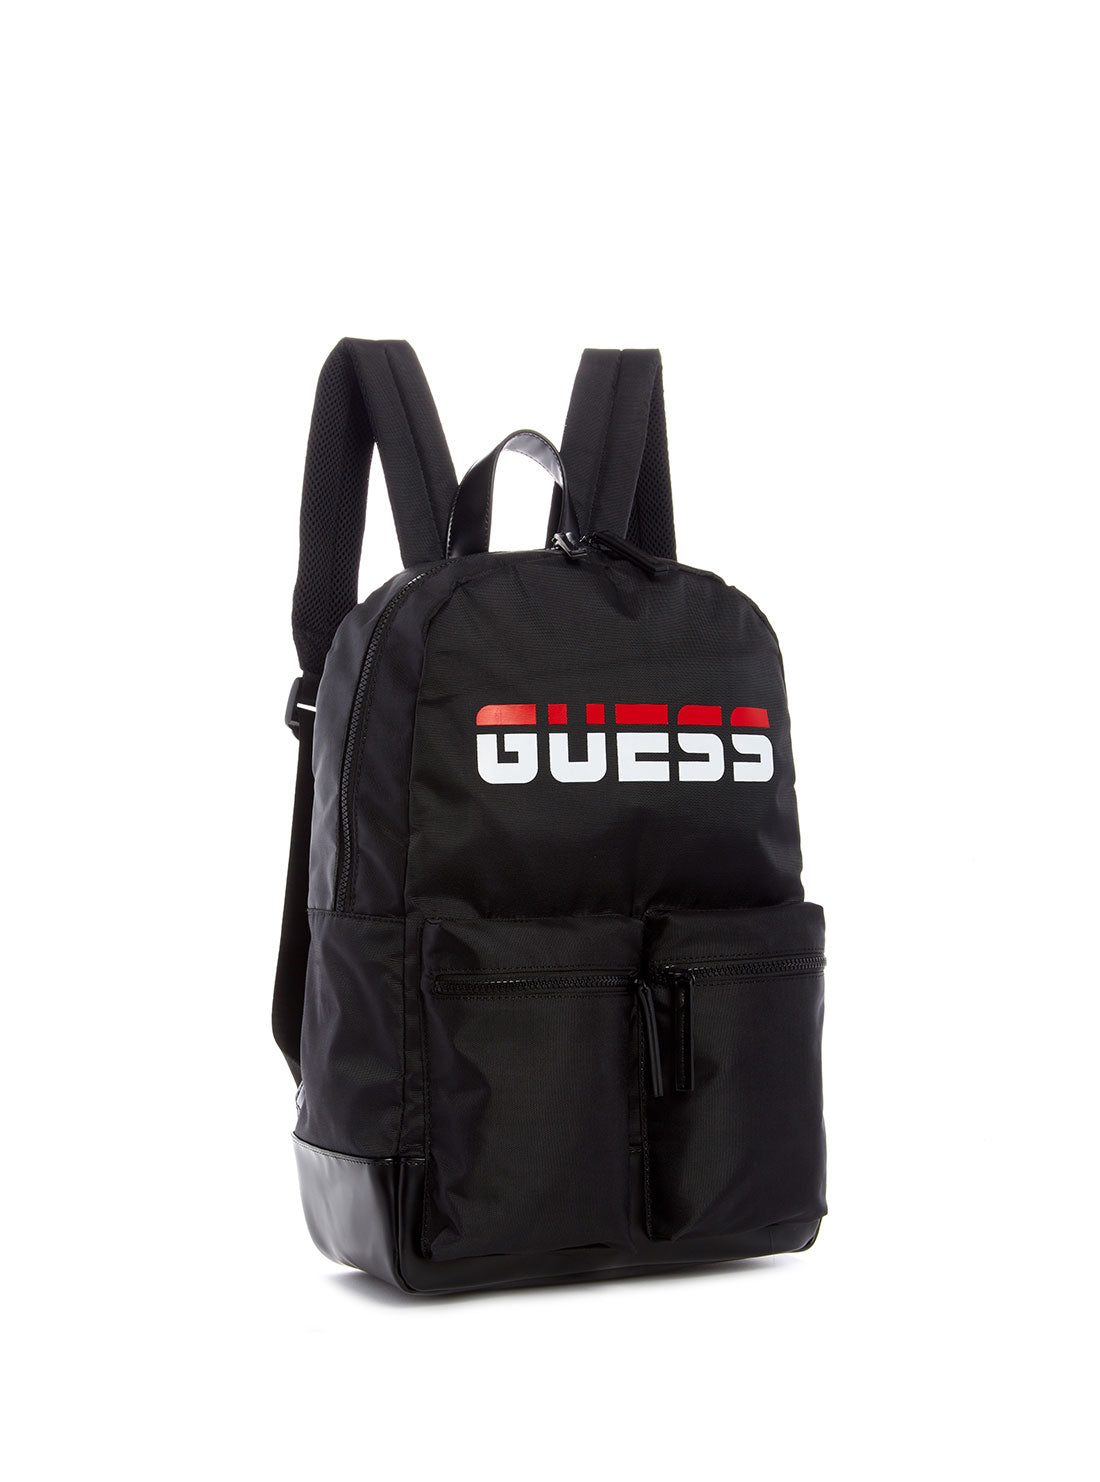 Black GUESS Duo Backpack side view